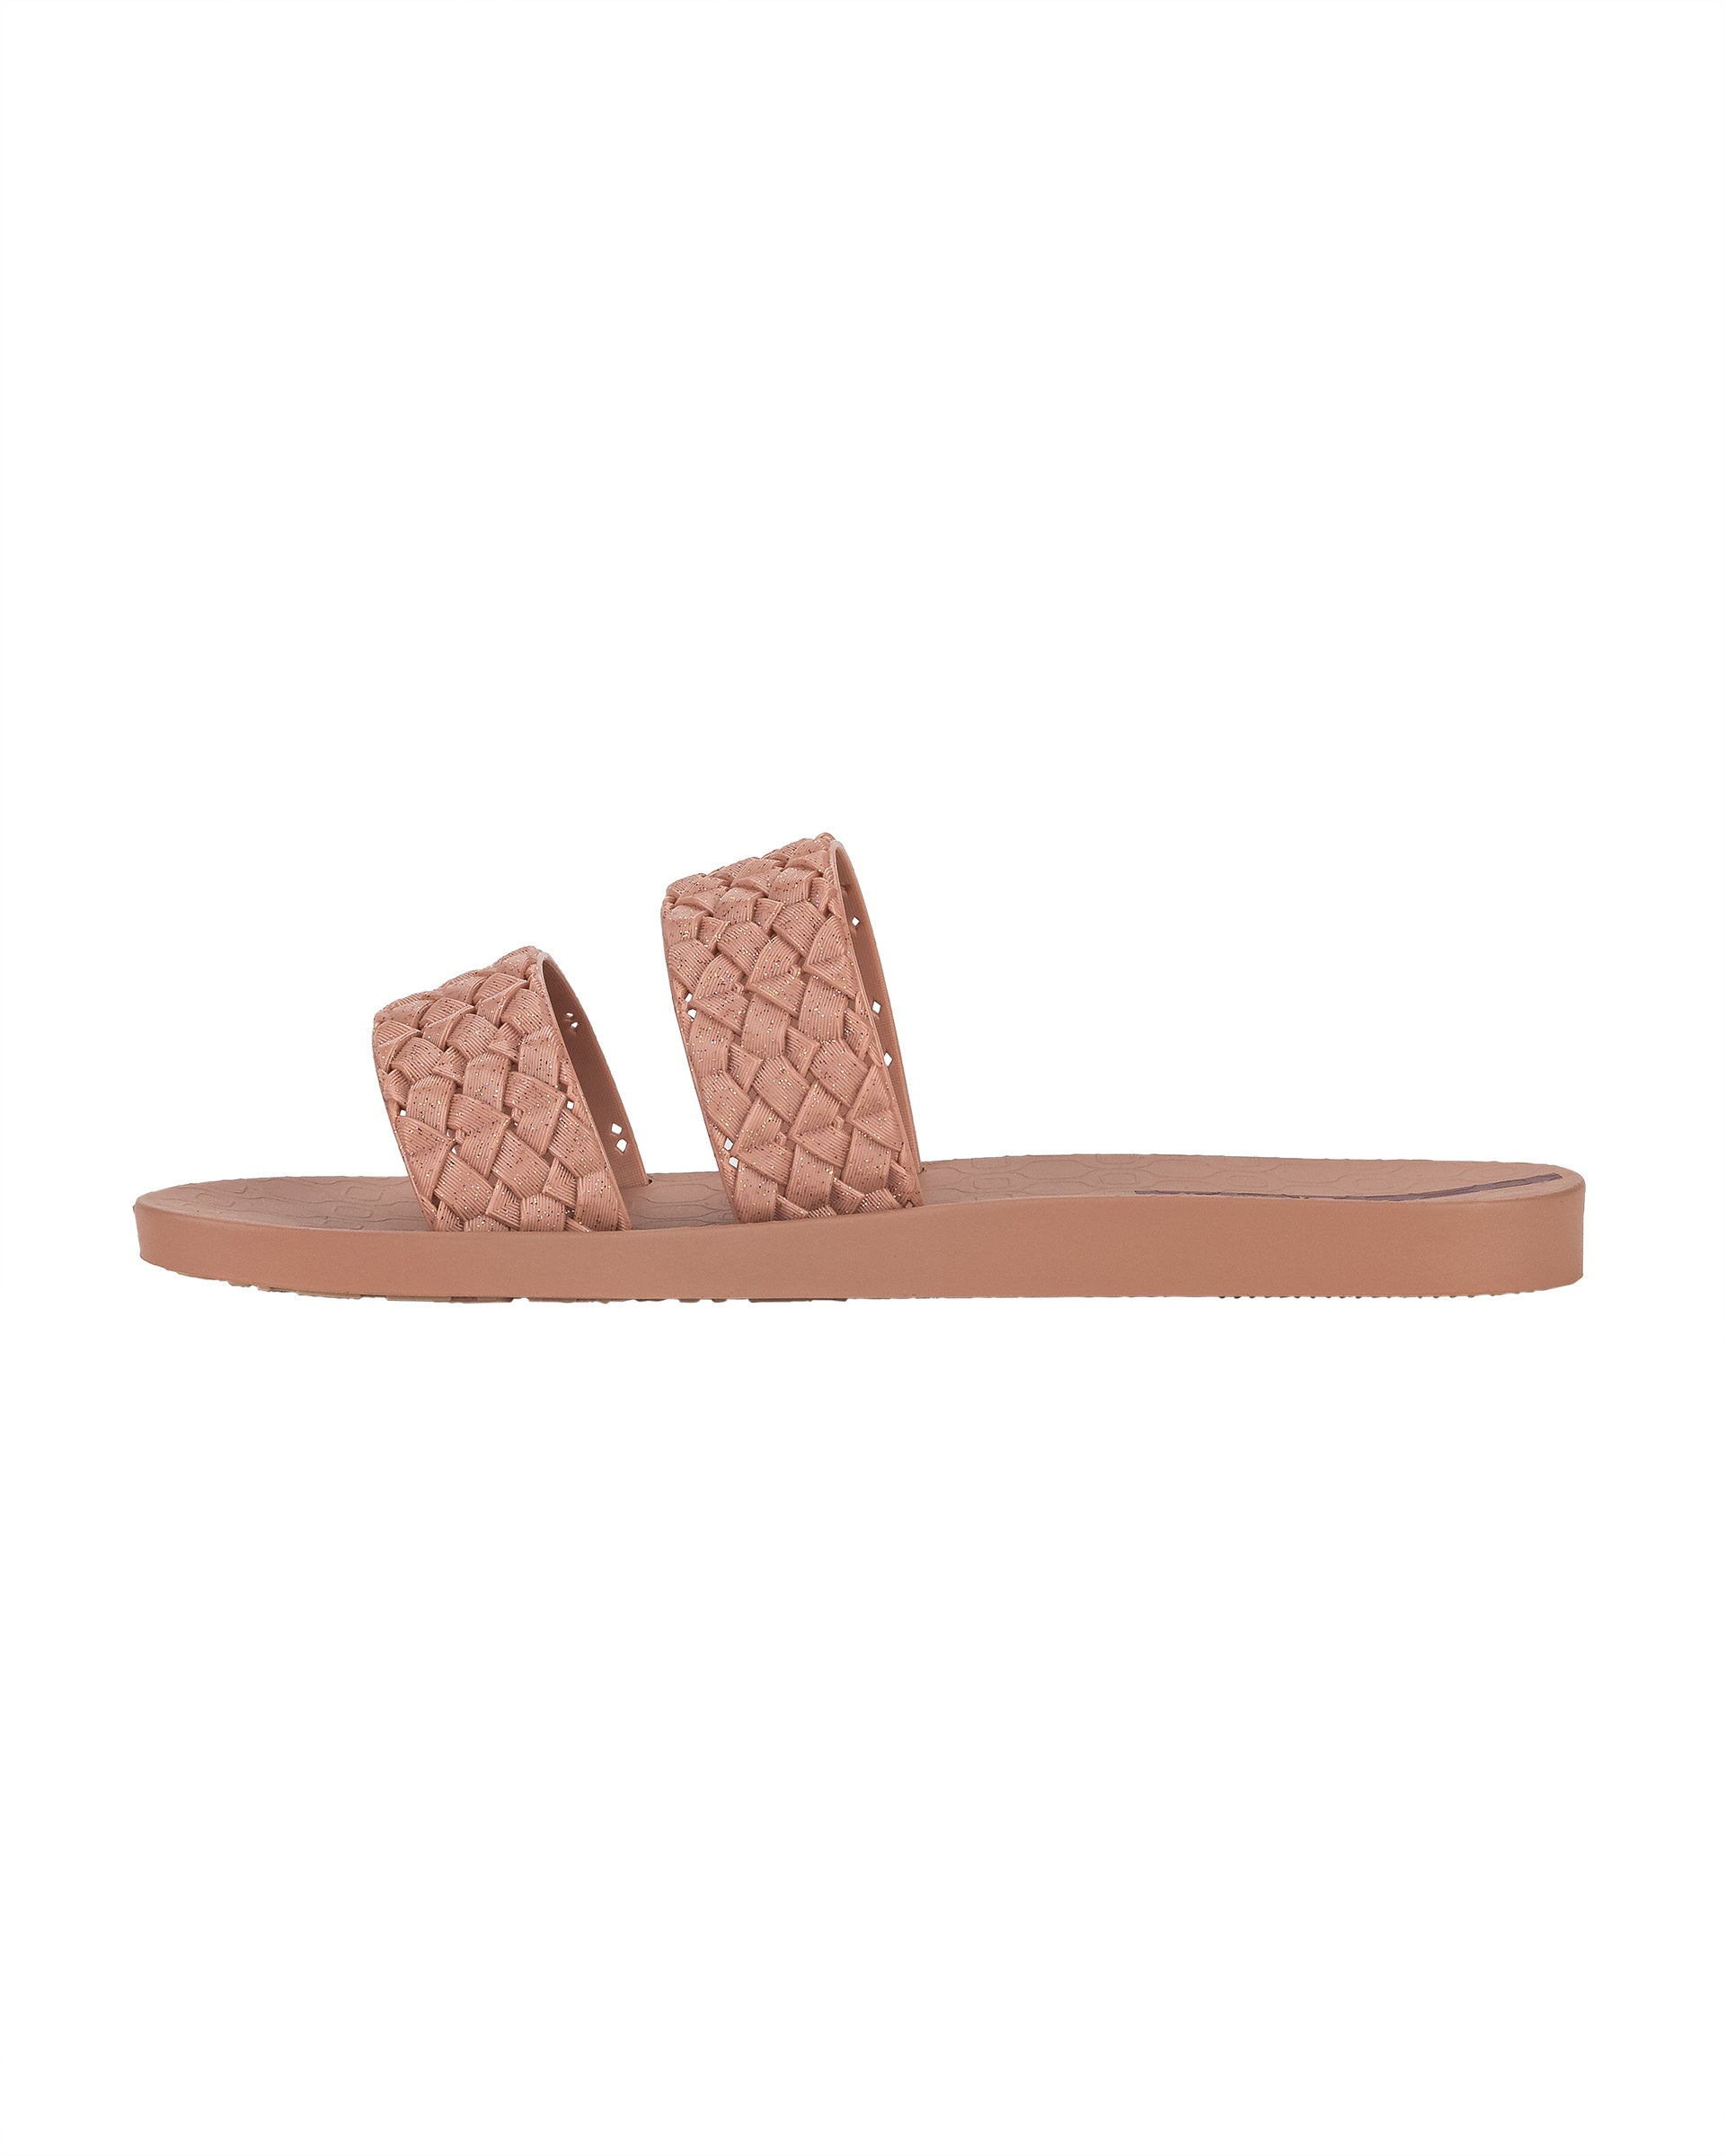 Inner side view of a pink Ipanema Renda women's slide with braided pink glitter straps.